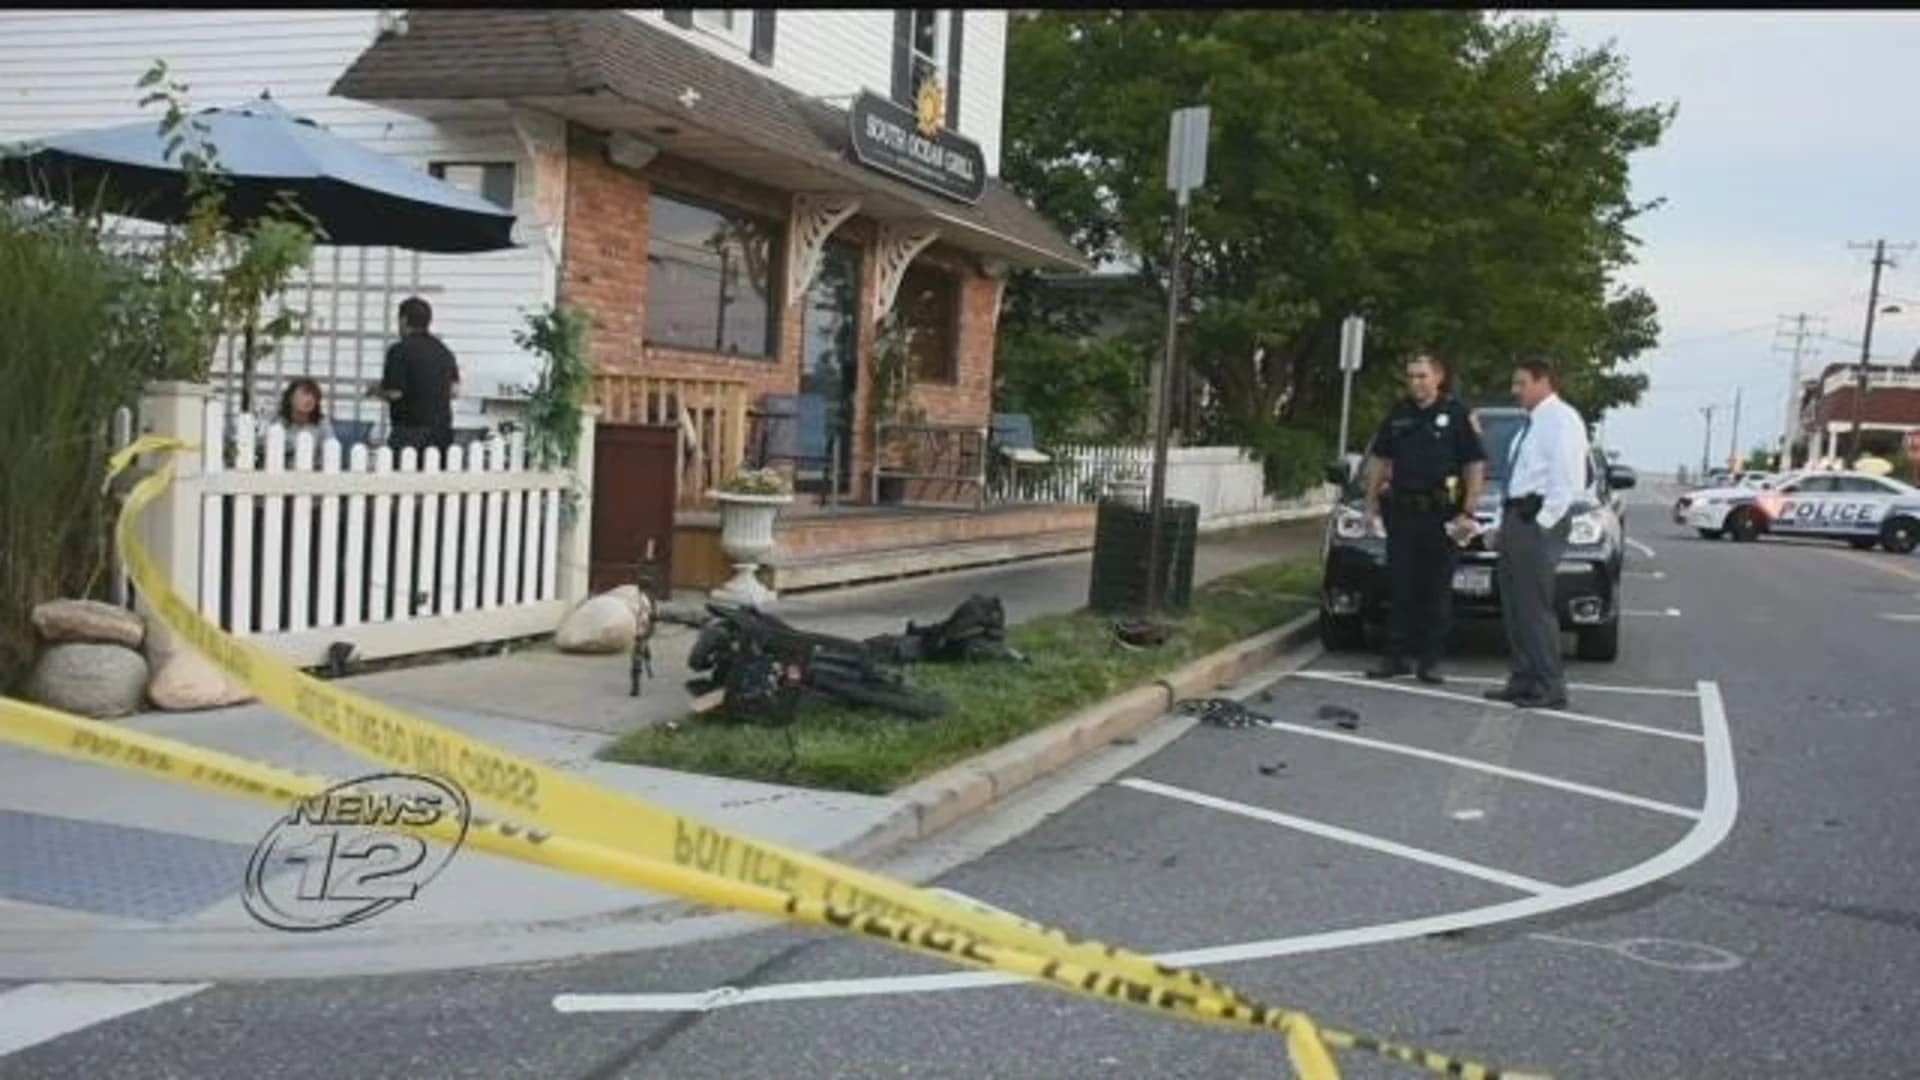 Hit-and-run driver strikes motorized bike in Patchogue